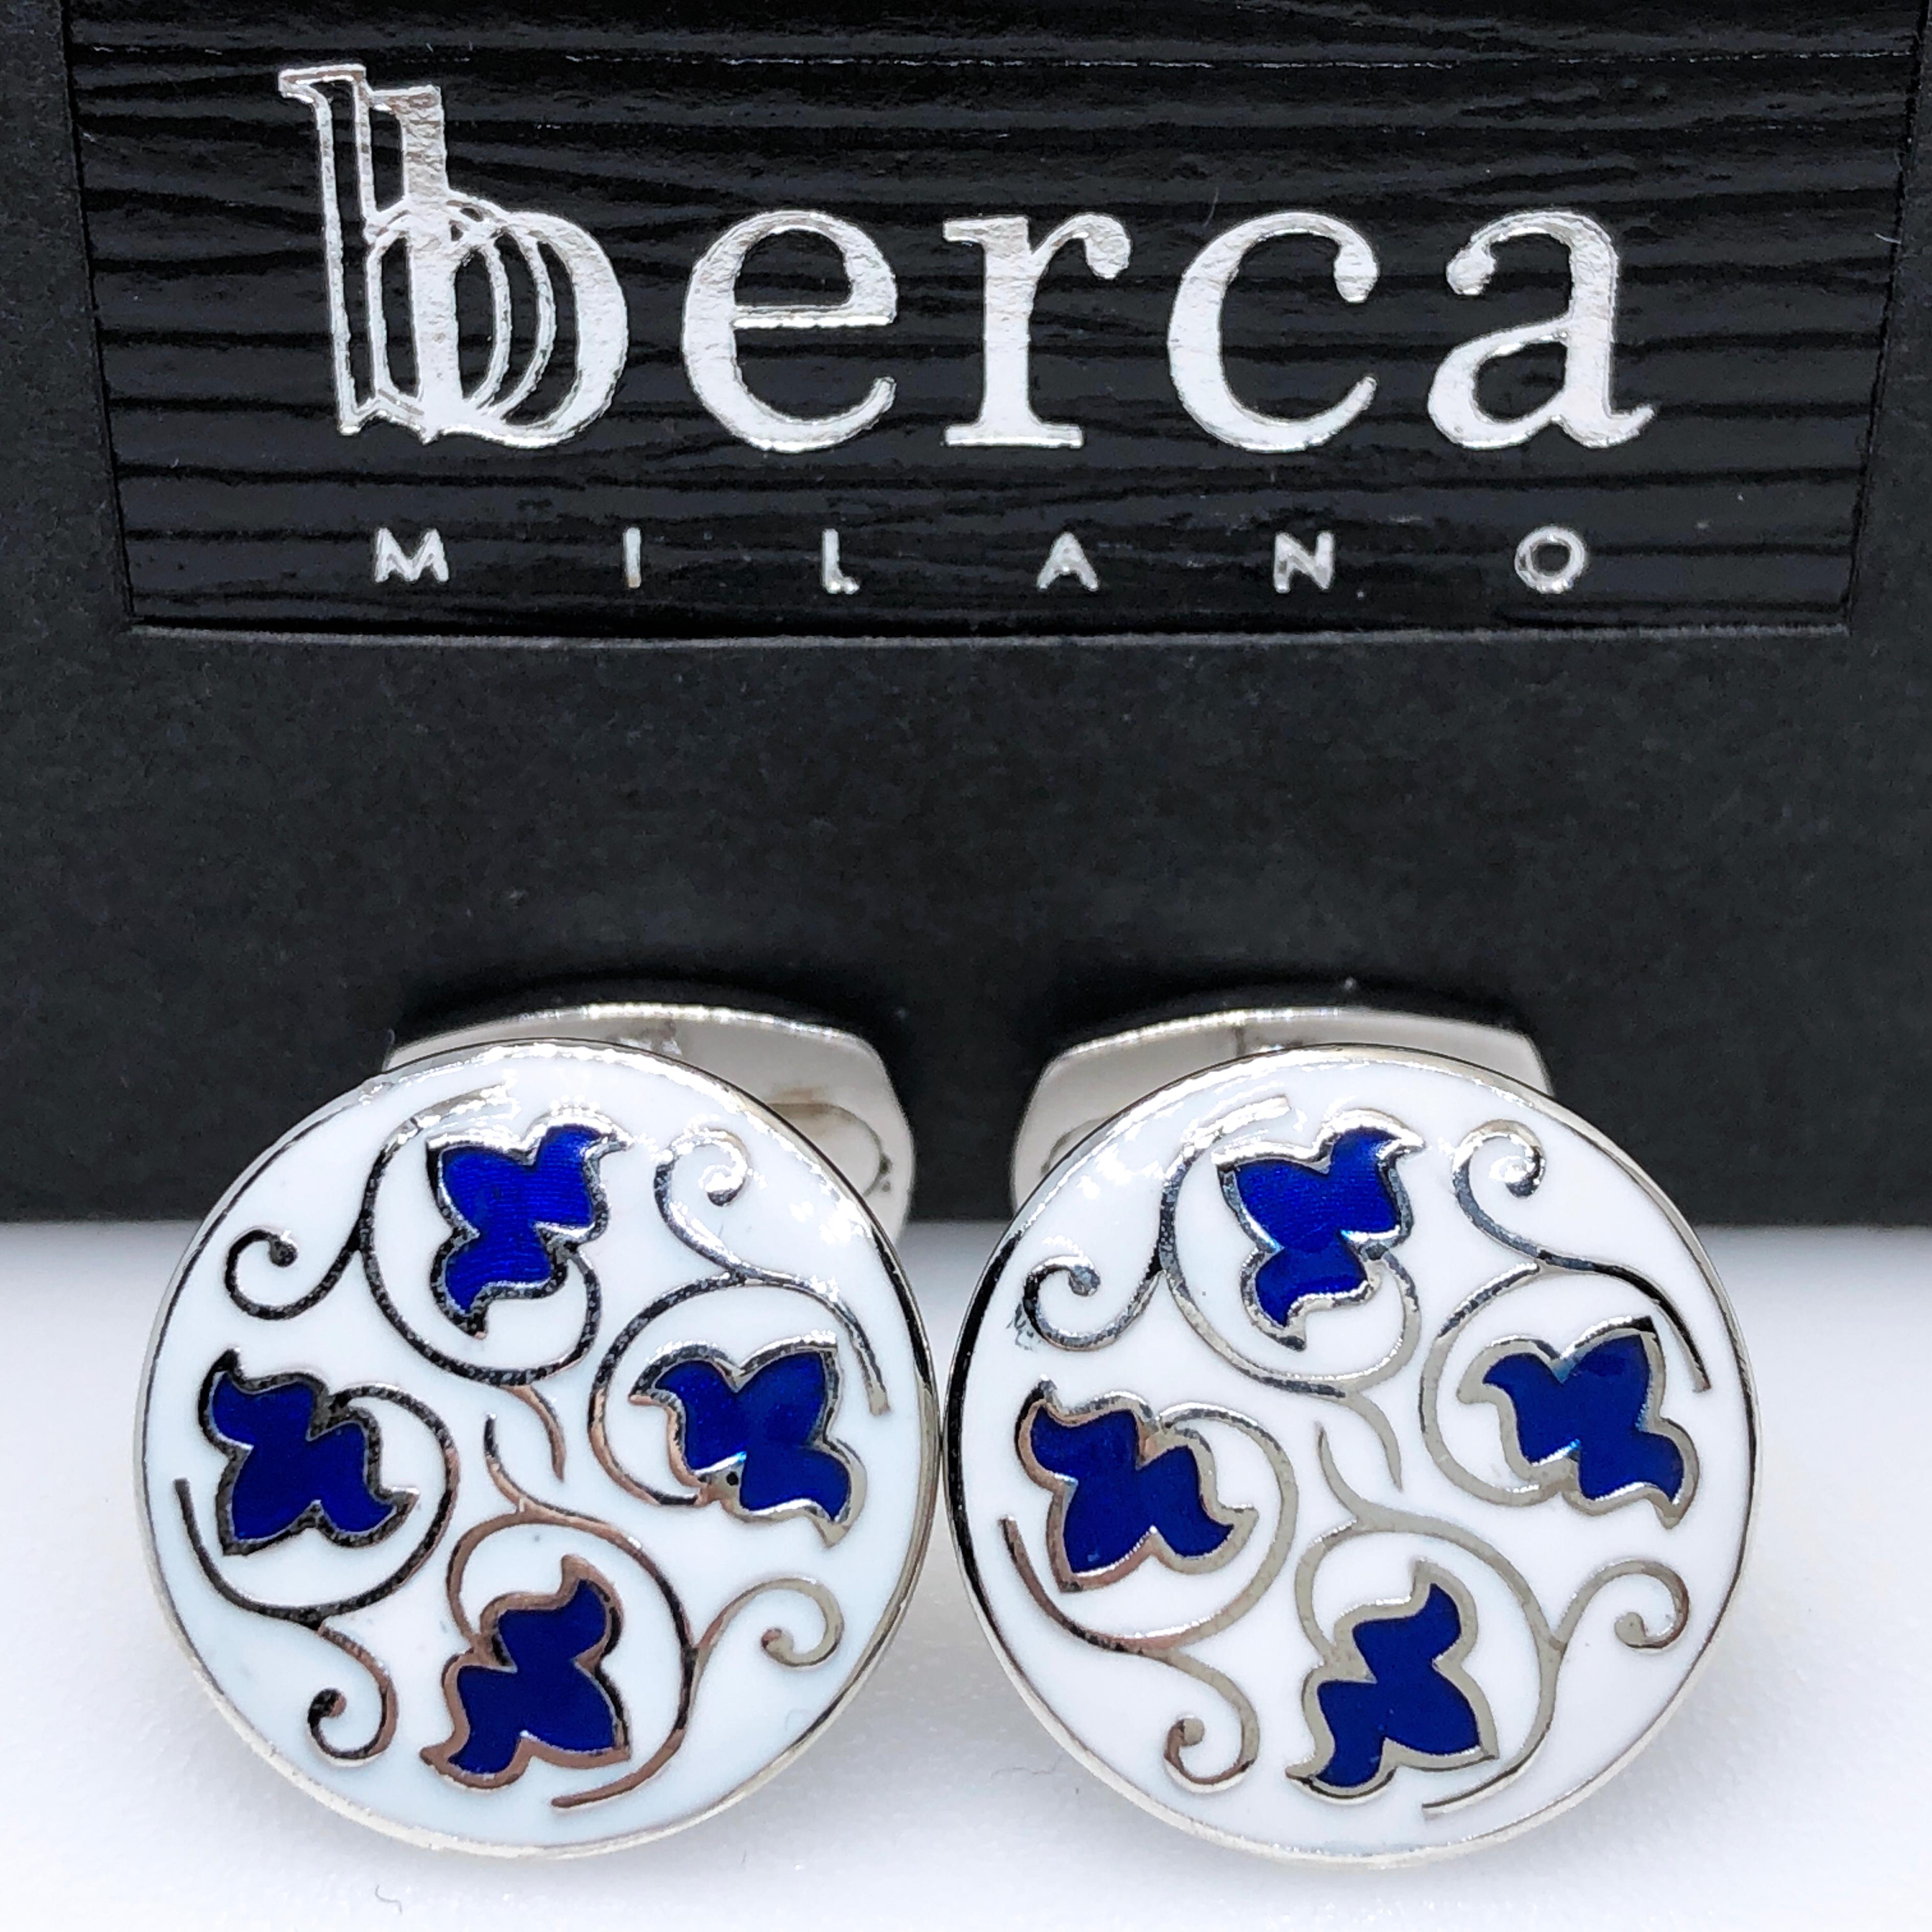 Chic, Unique yet Timeless Hand Enameled Blue Grape Leaves, Symbol of Good Luck, in a Round White Setting Sterling Silver Cufflinks, T-bar back.
In our Smart Suede Tobacco Leather Case and Pouch.

Front Diameter about 0.679 inches.